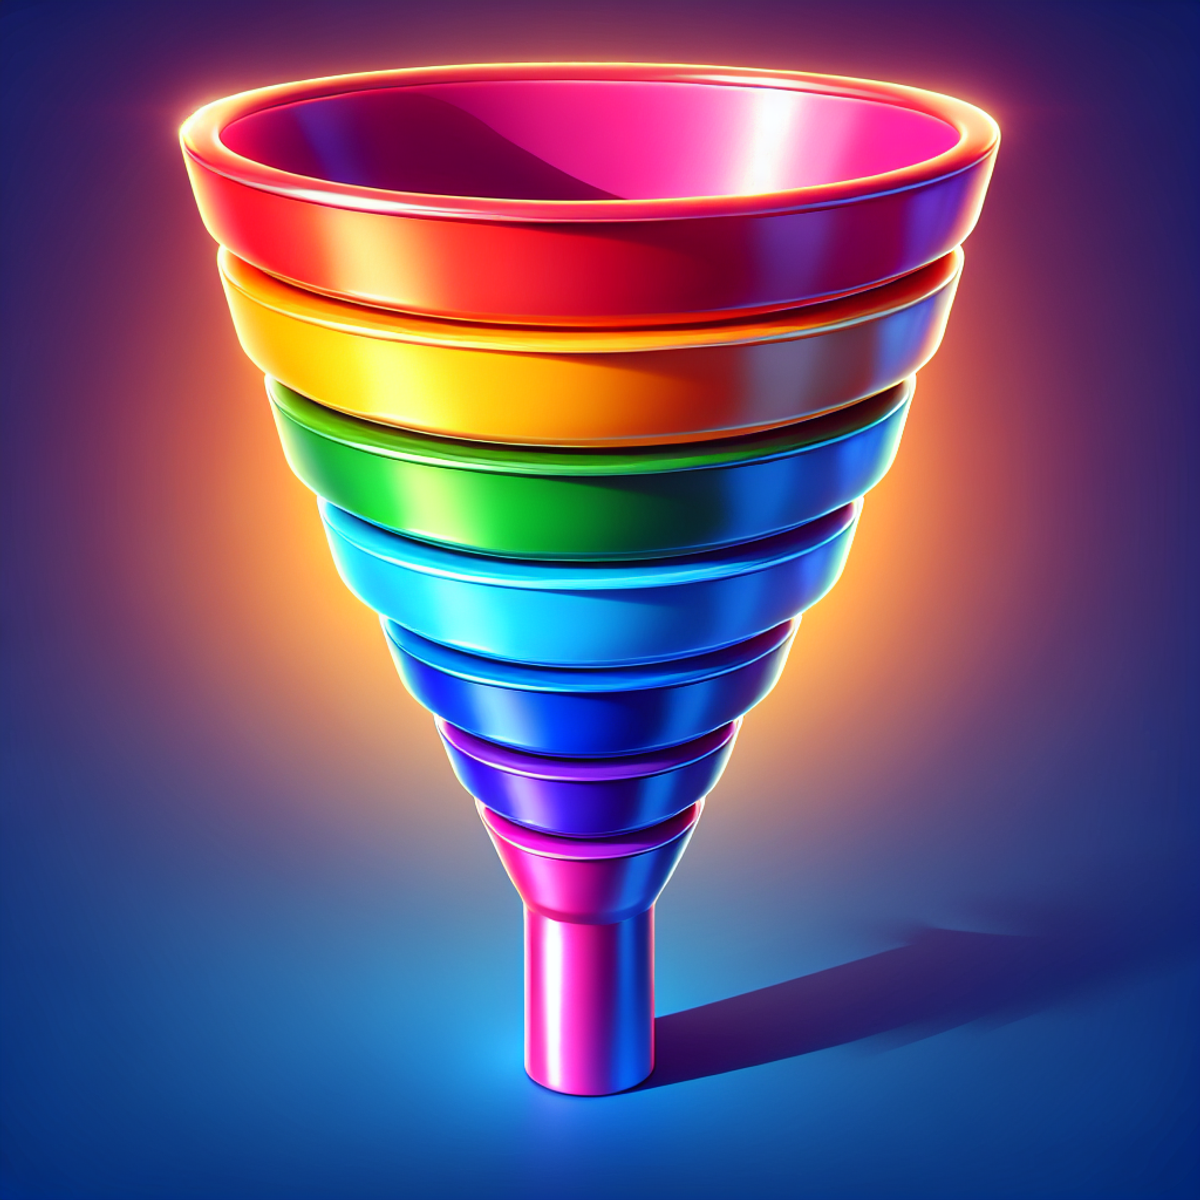 A multi-tiered funnel with distinct colors for each stage, creating a rainbow effect from top to bottom.